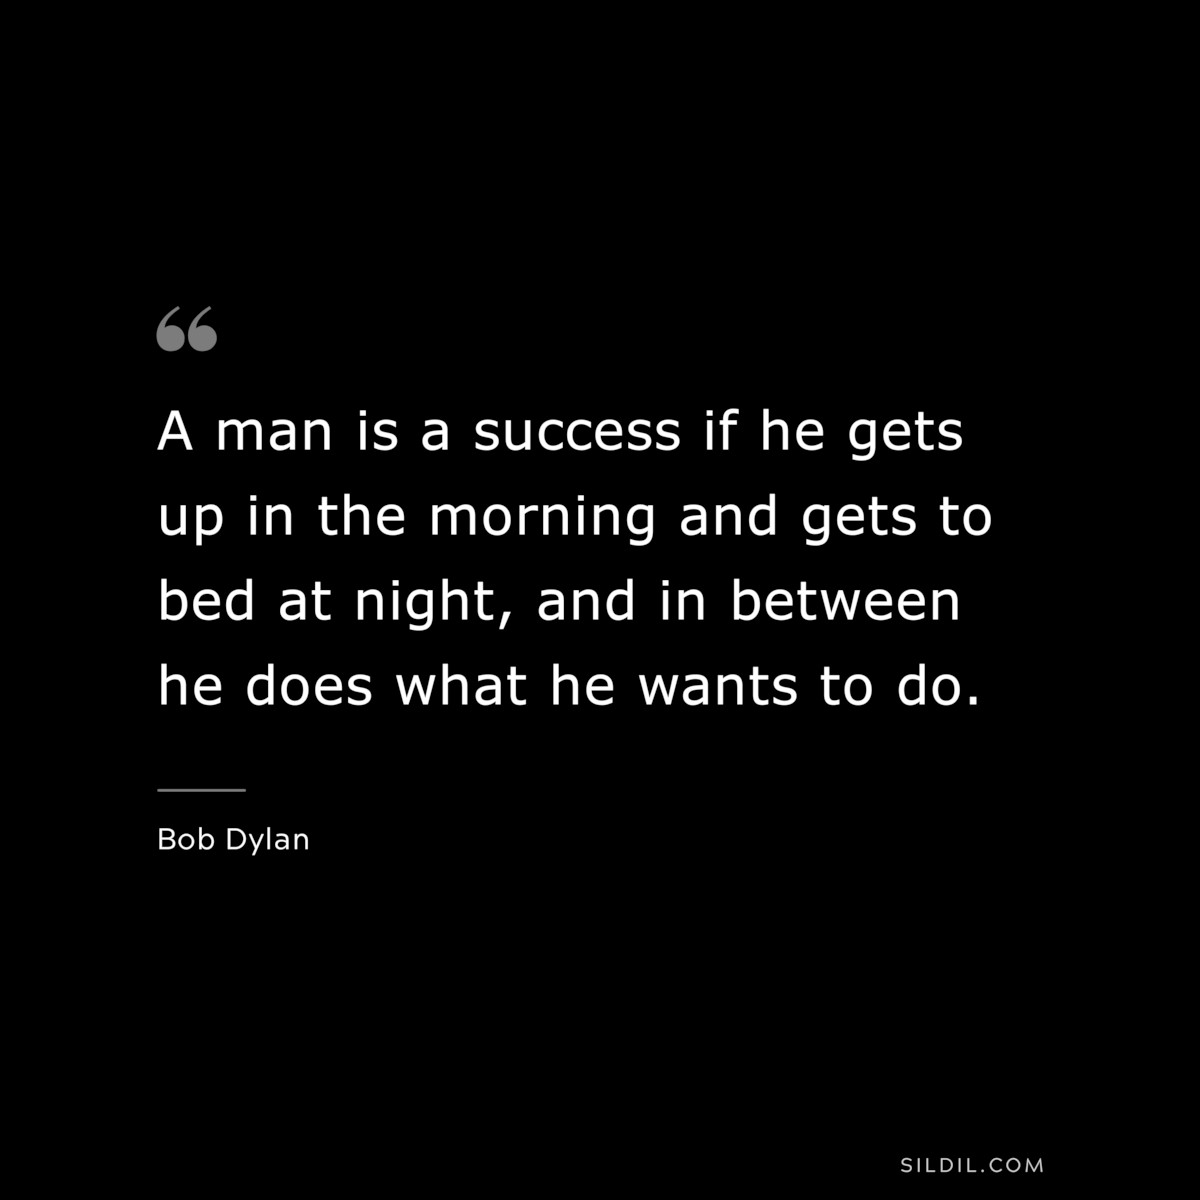 A man is a success if he gets up in the morning and gets to bed at night, and in between he does what he wants to do. ― Bob Dylan